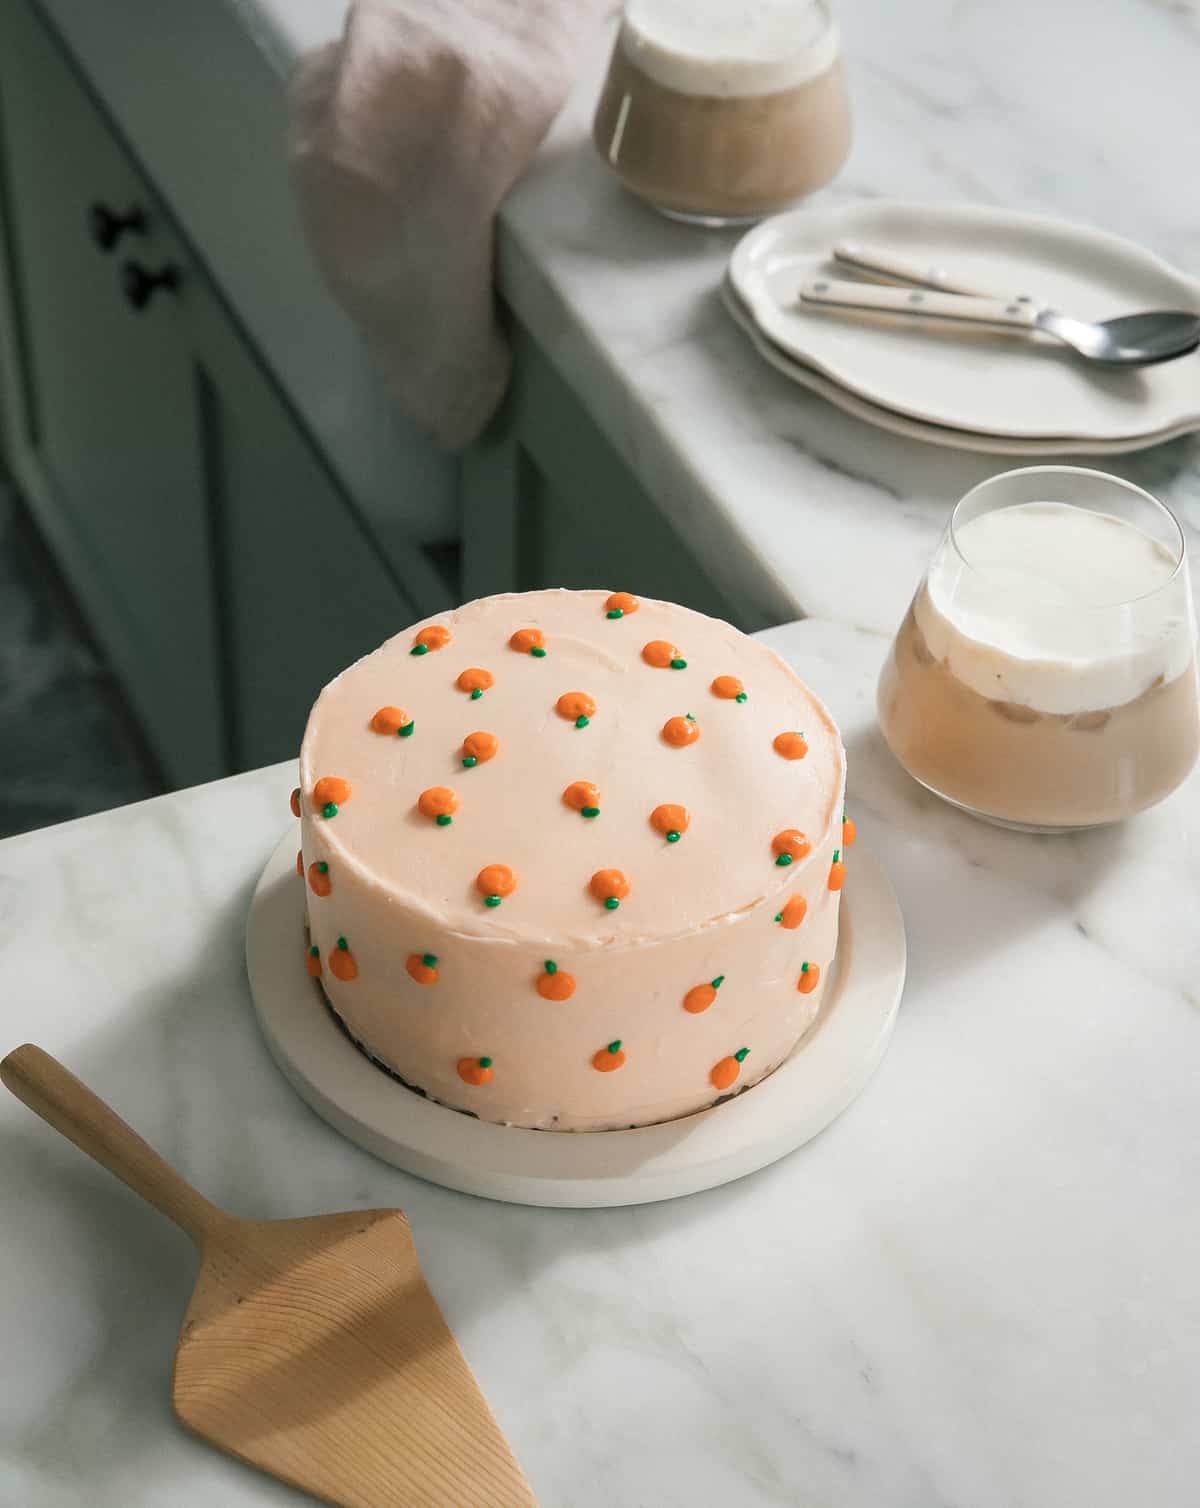 Creamsicle Cake on counter with coffee. 